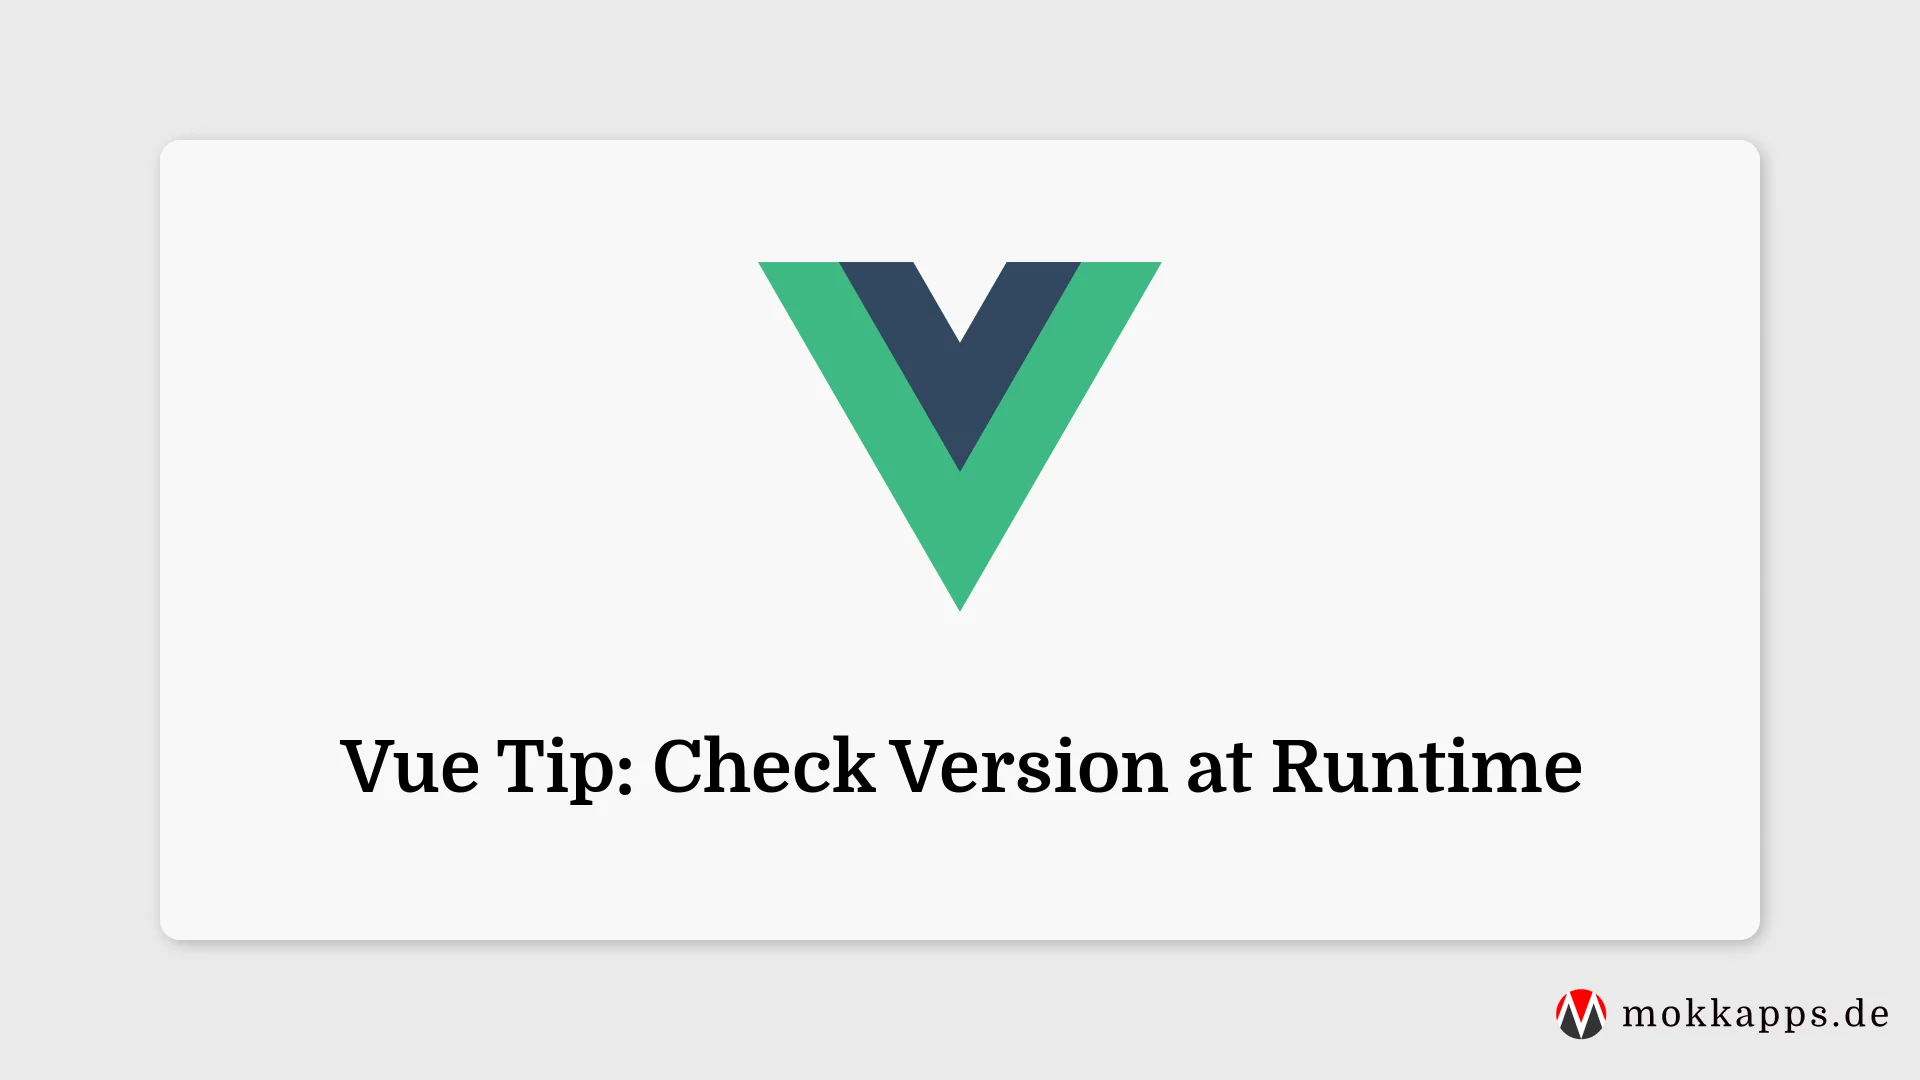 Vue Tip: Check Version at Runtime Image